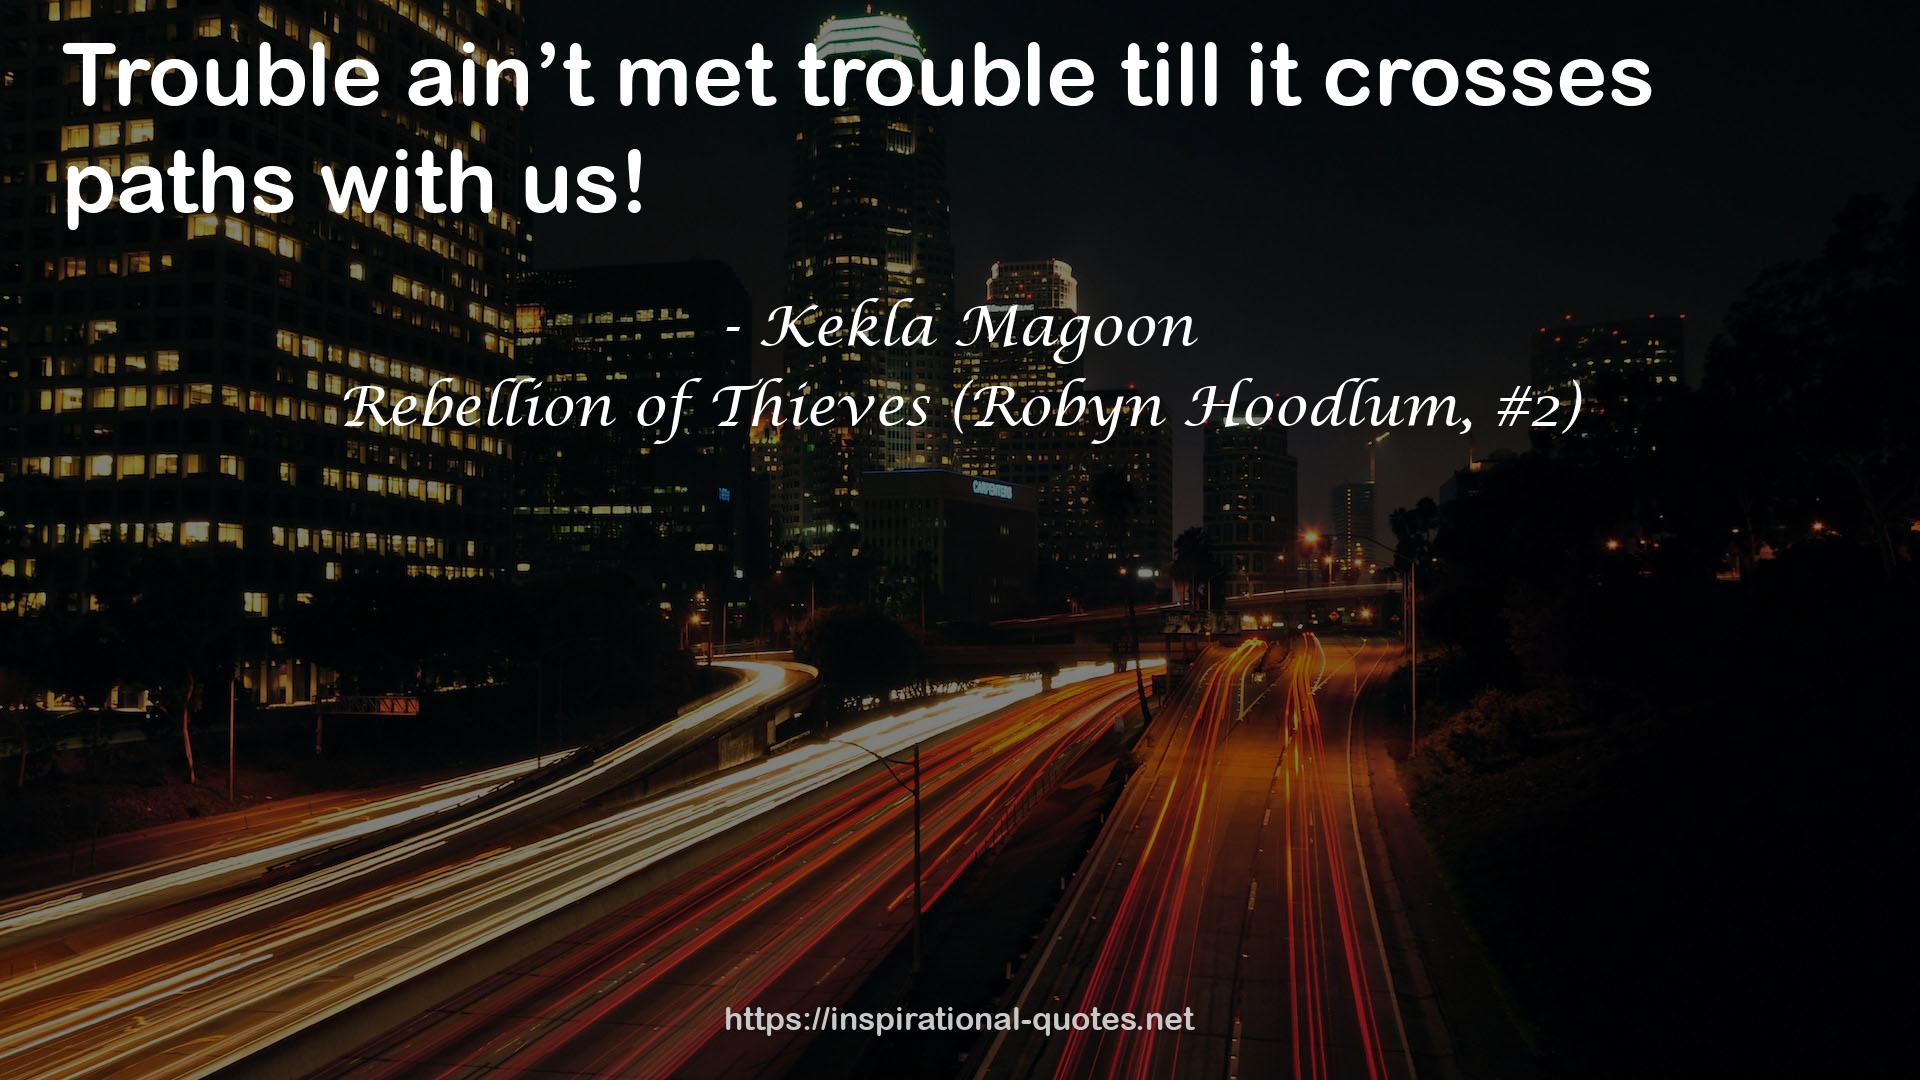 Rebellion of Thieves (Robyn Hoodlum, #2) QUOTES